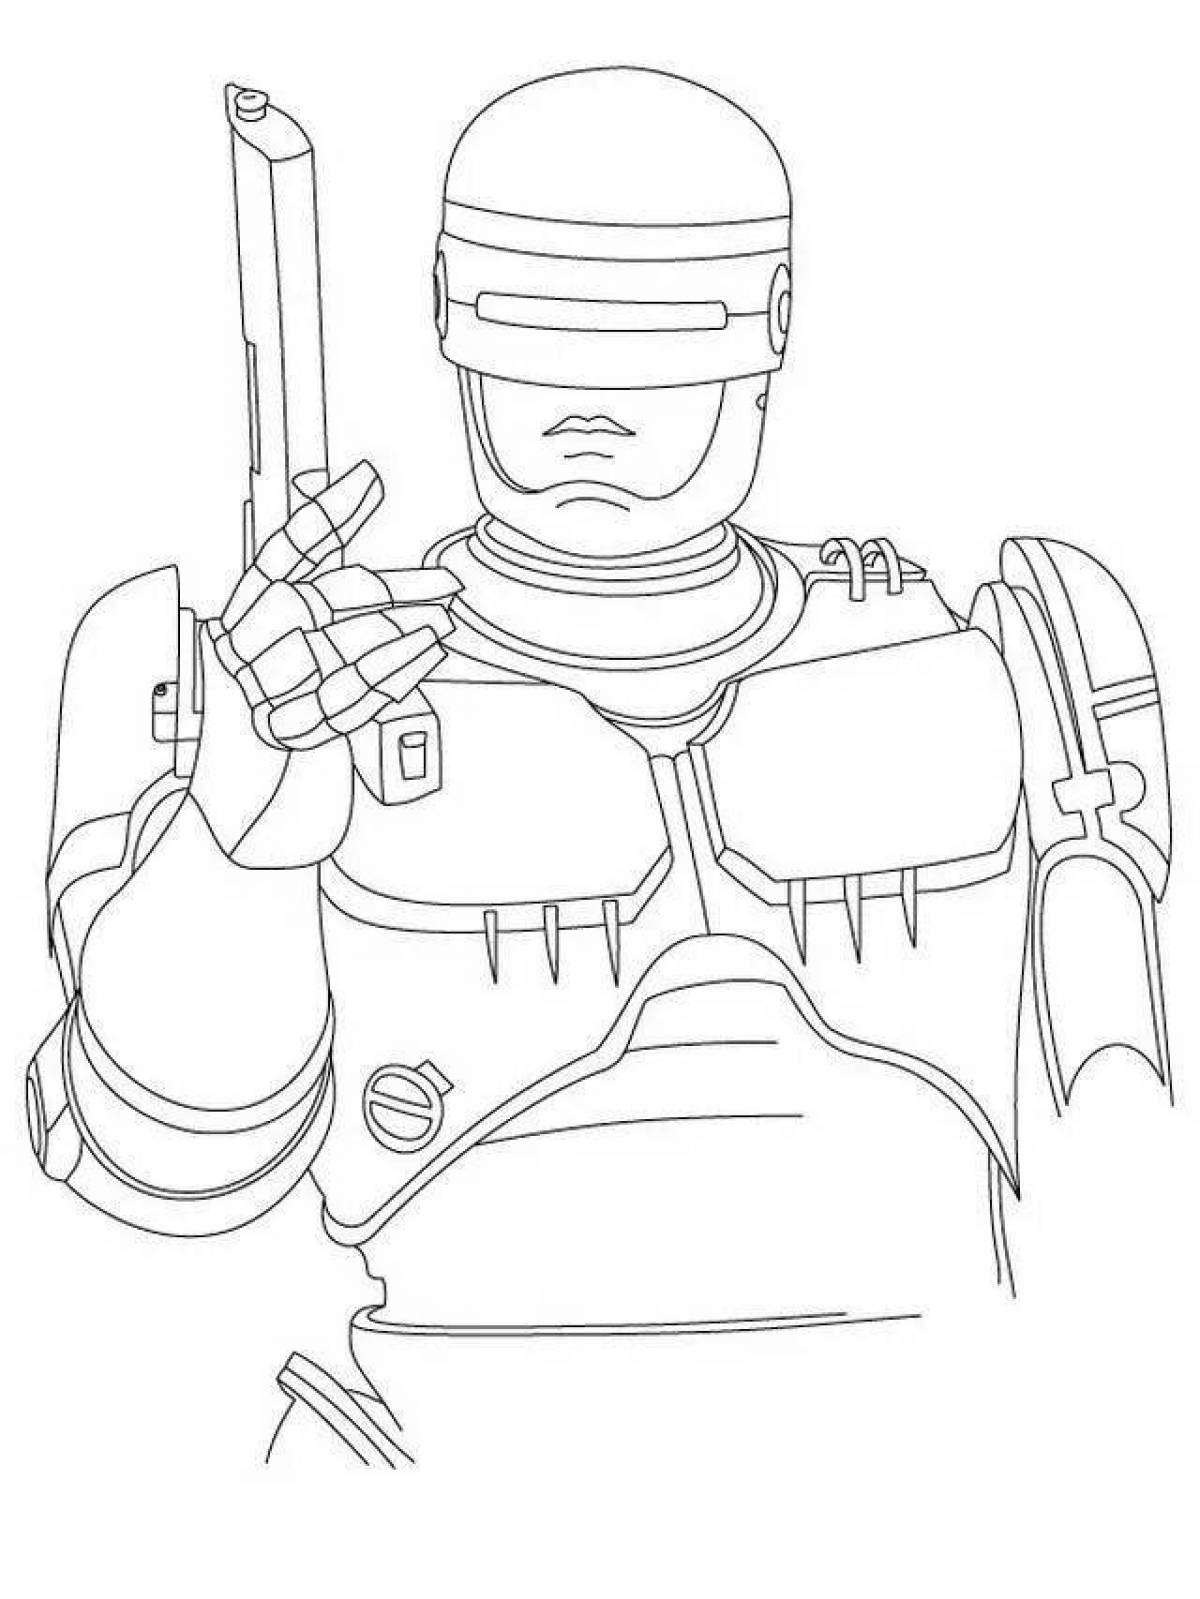 Glitter police robot coloring page